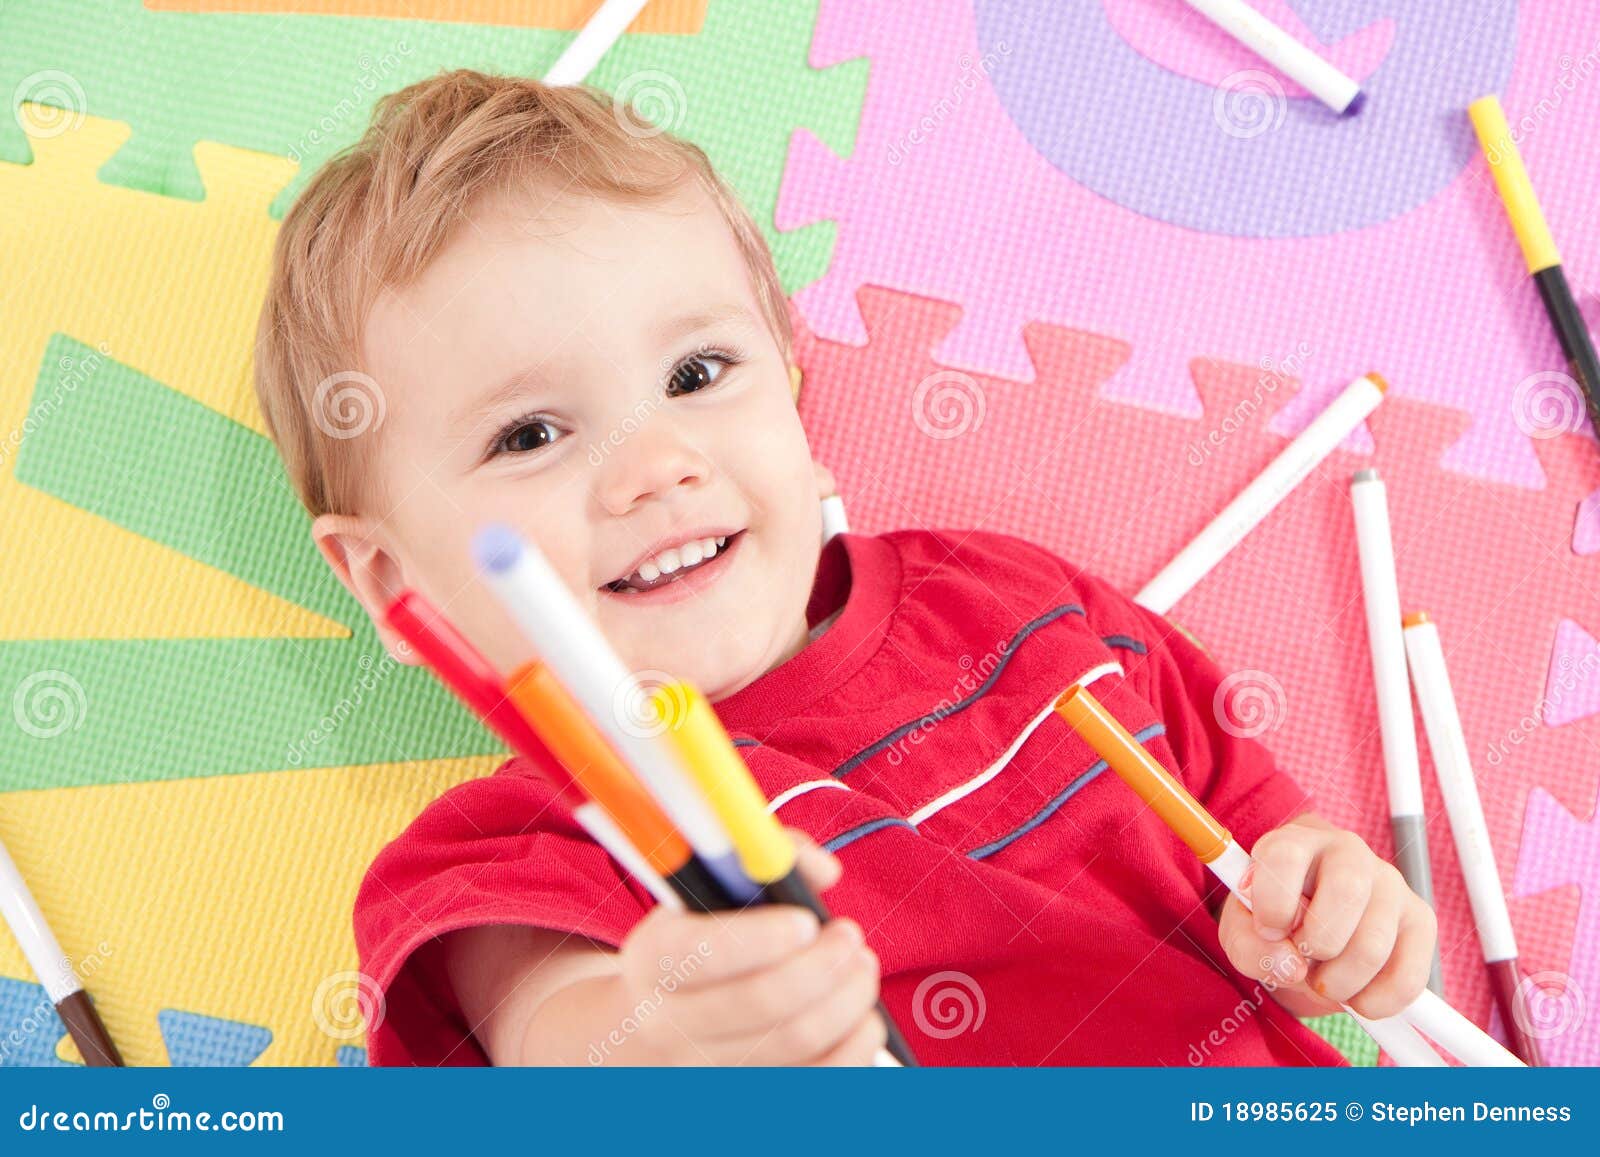 happy boy with kids drawing pens